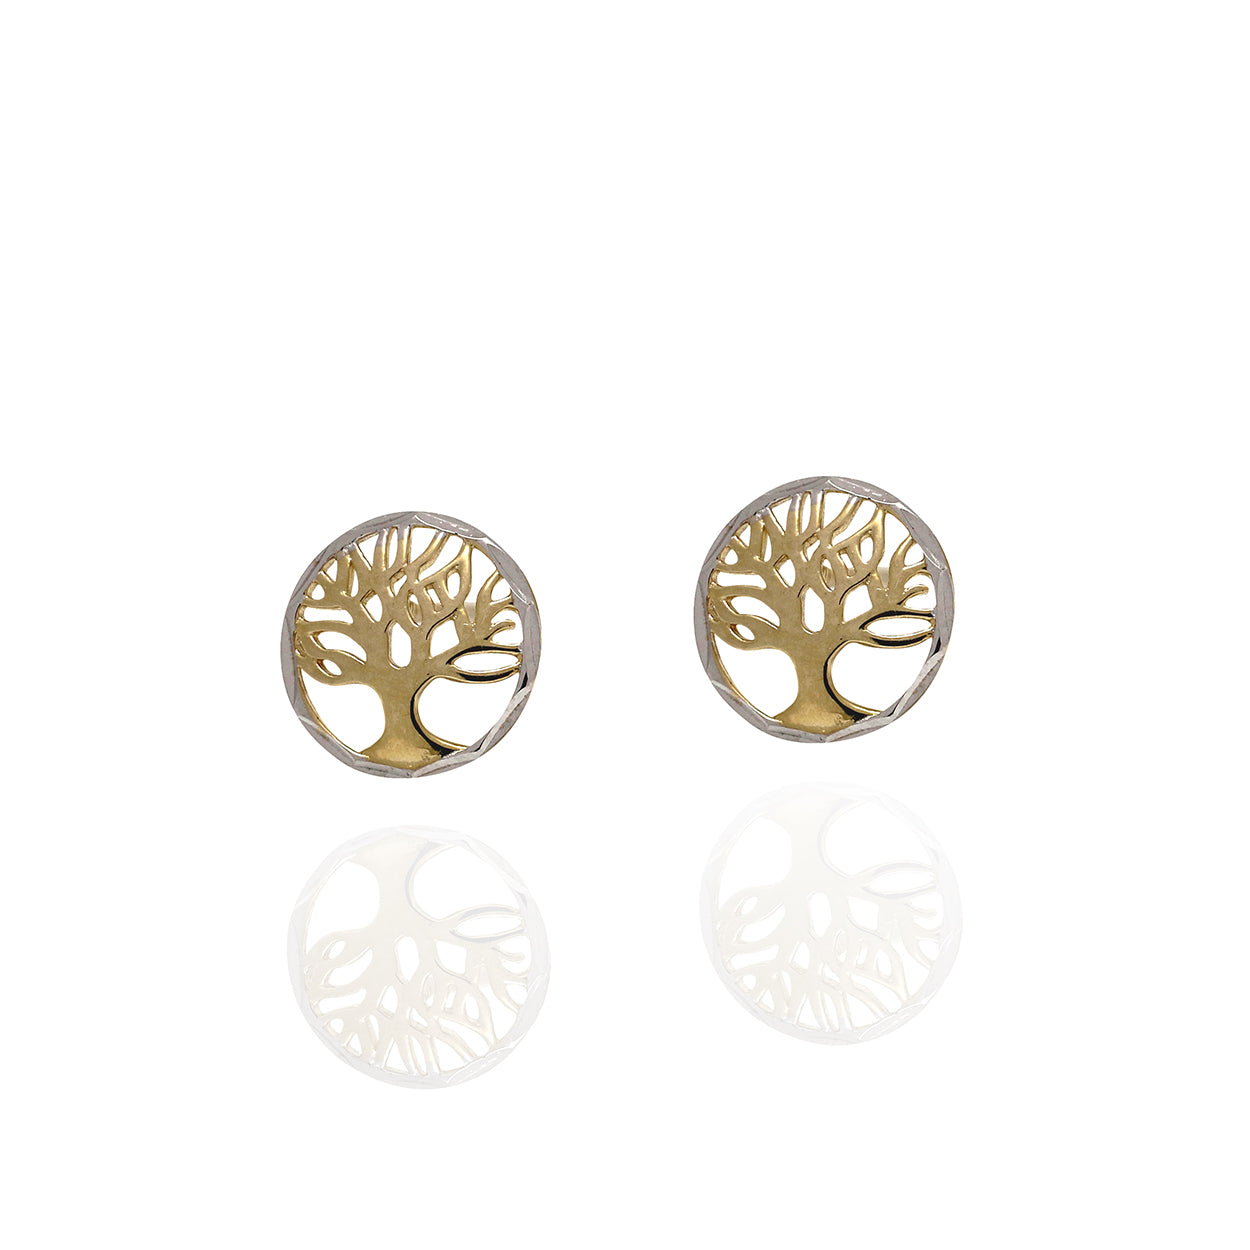 10kt Yellow and White Gold Tree of Life Stud Round Stud Earrings